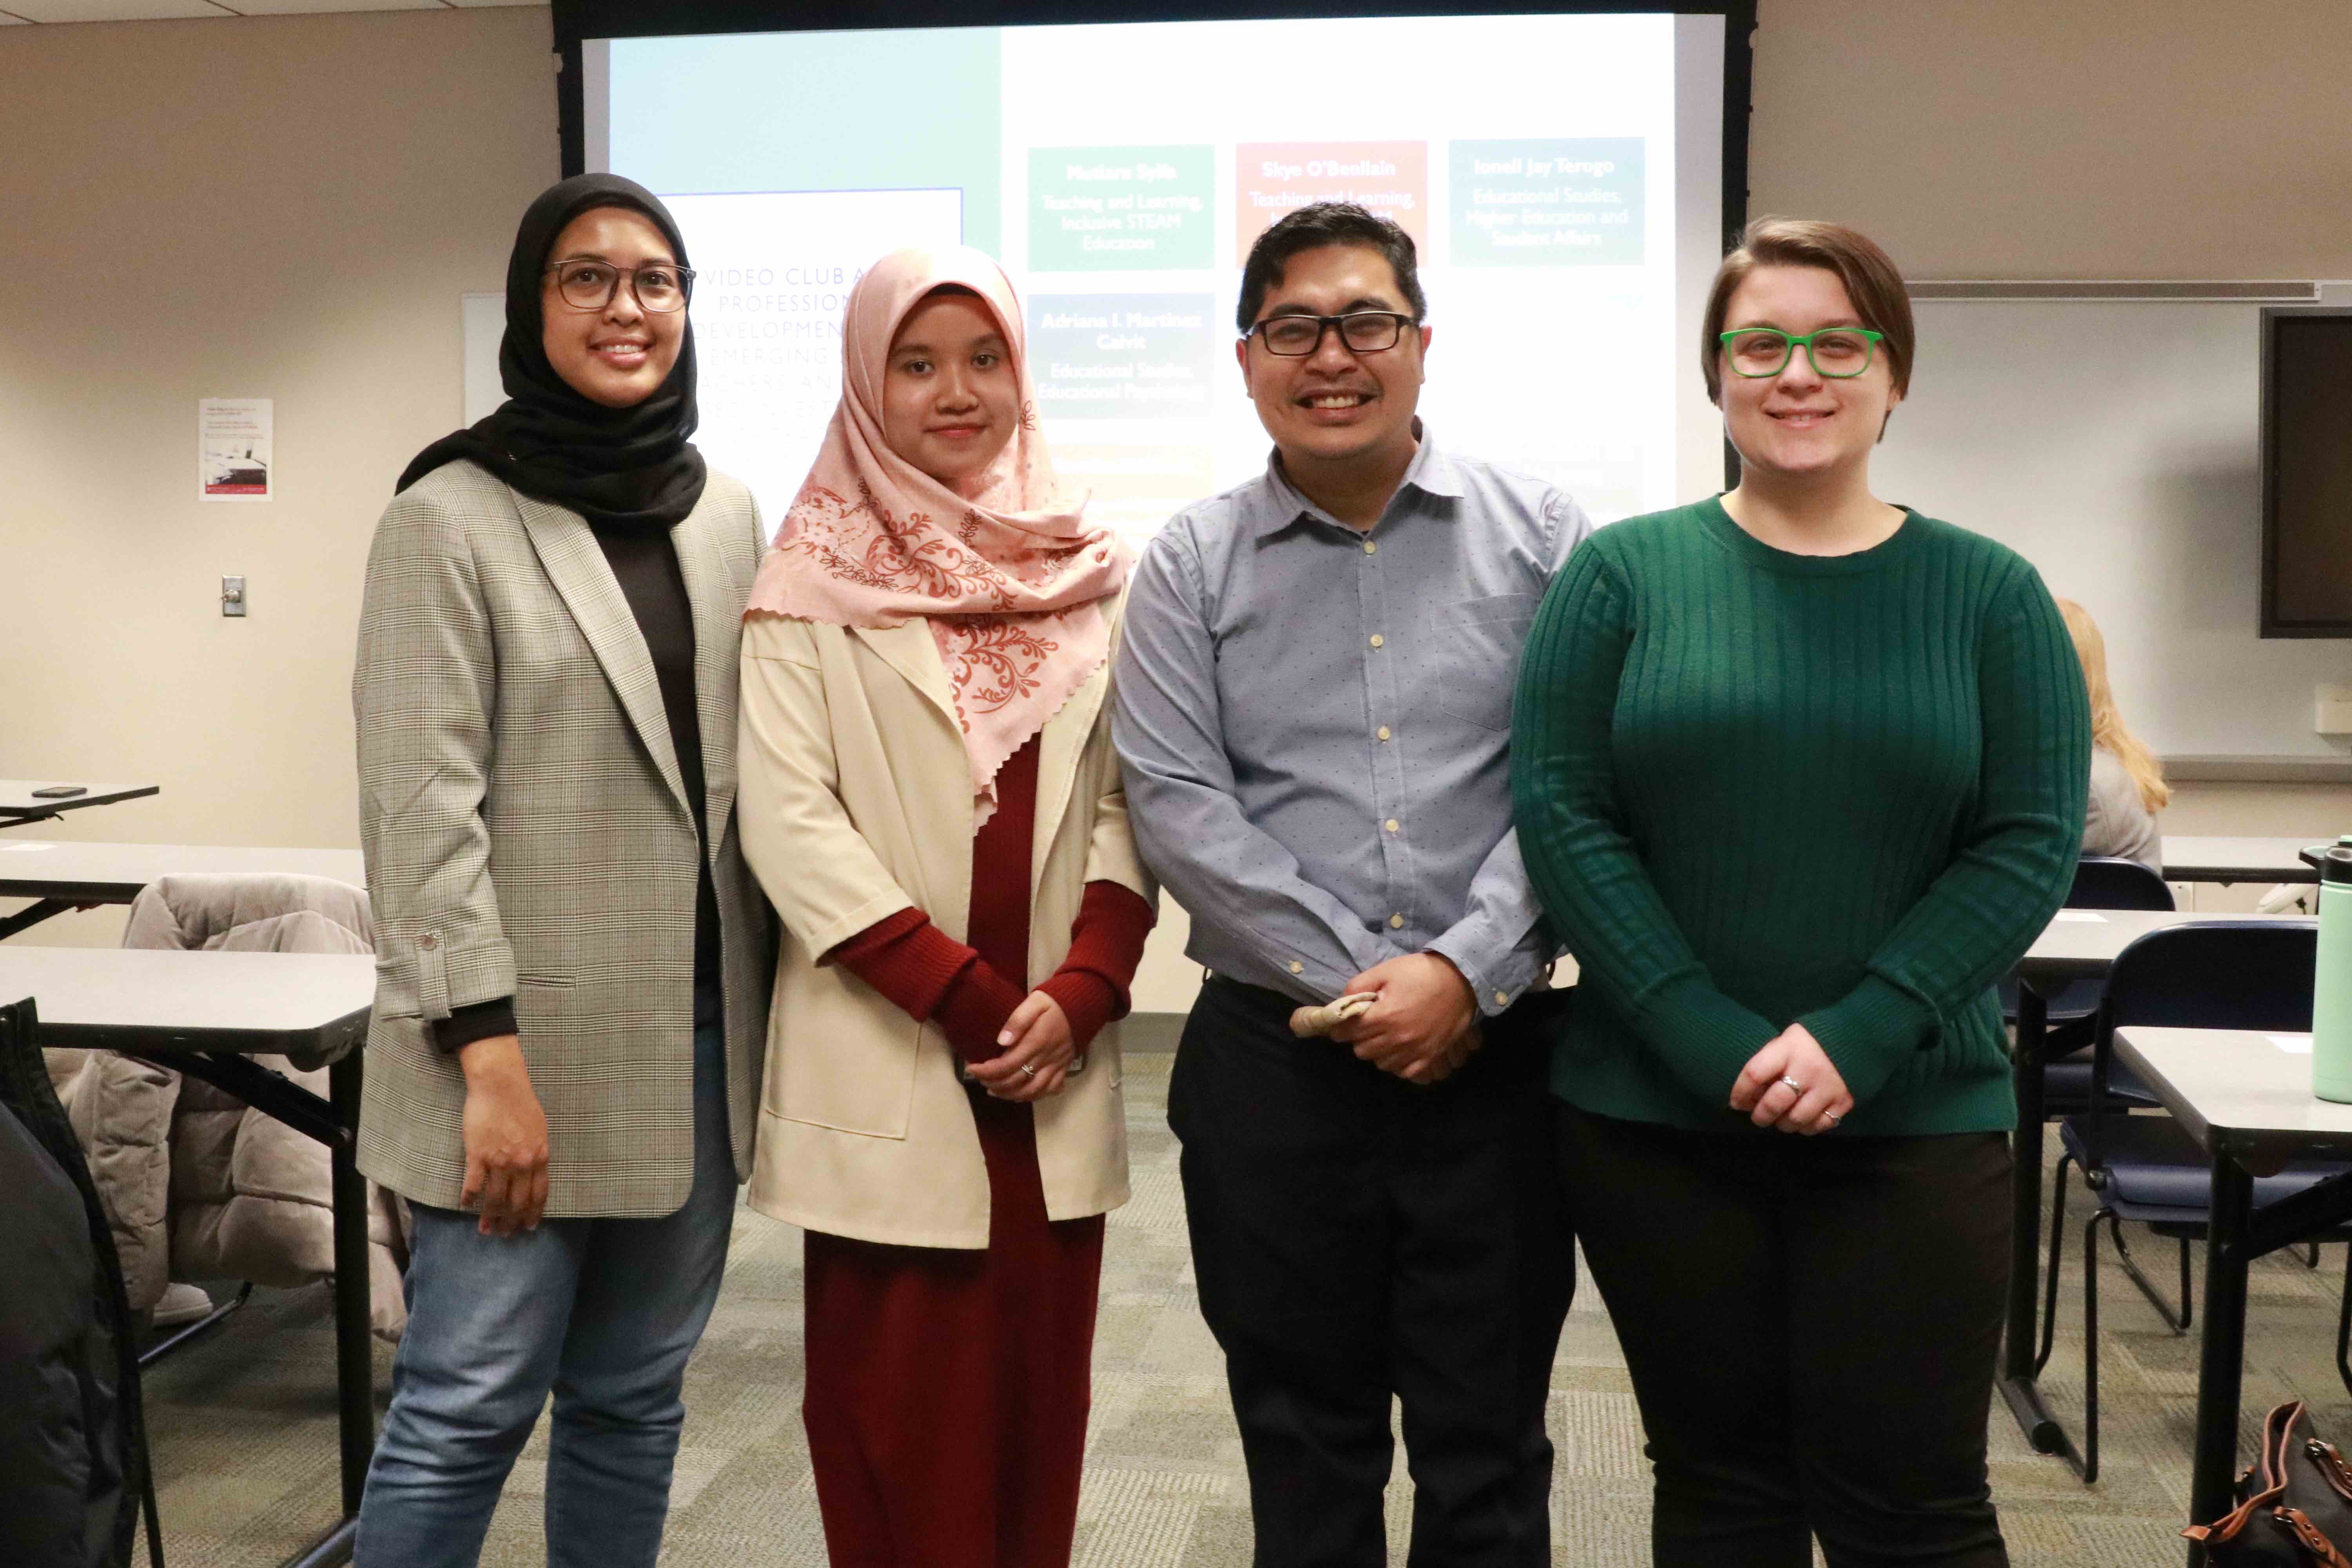 Ohio State Team members with the video club project Lanoke Paradita, Mutiara Syifa, Ionell Jay Terogo and Skye O'Beollain.